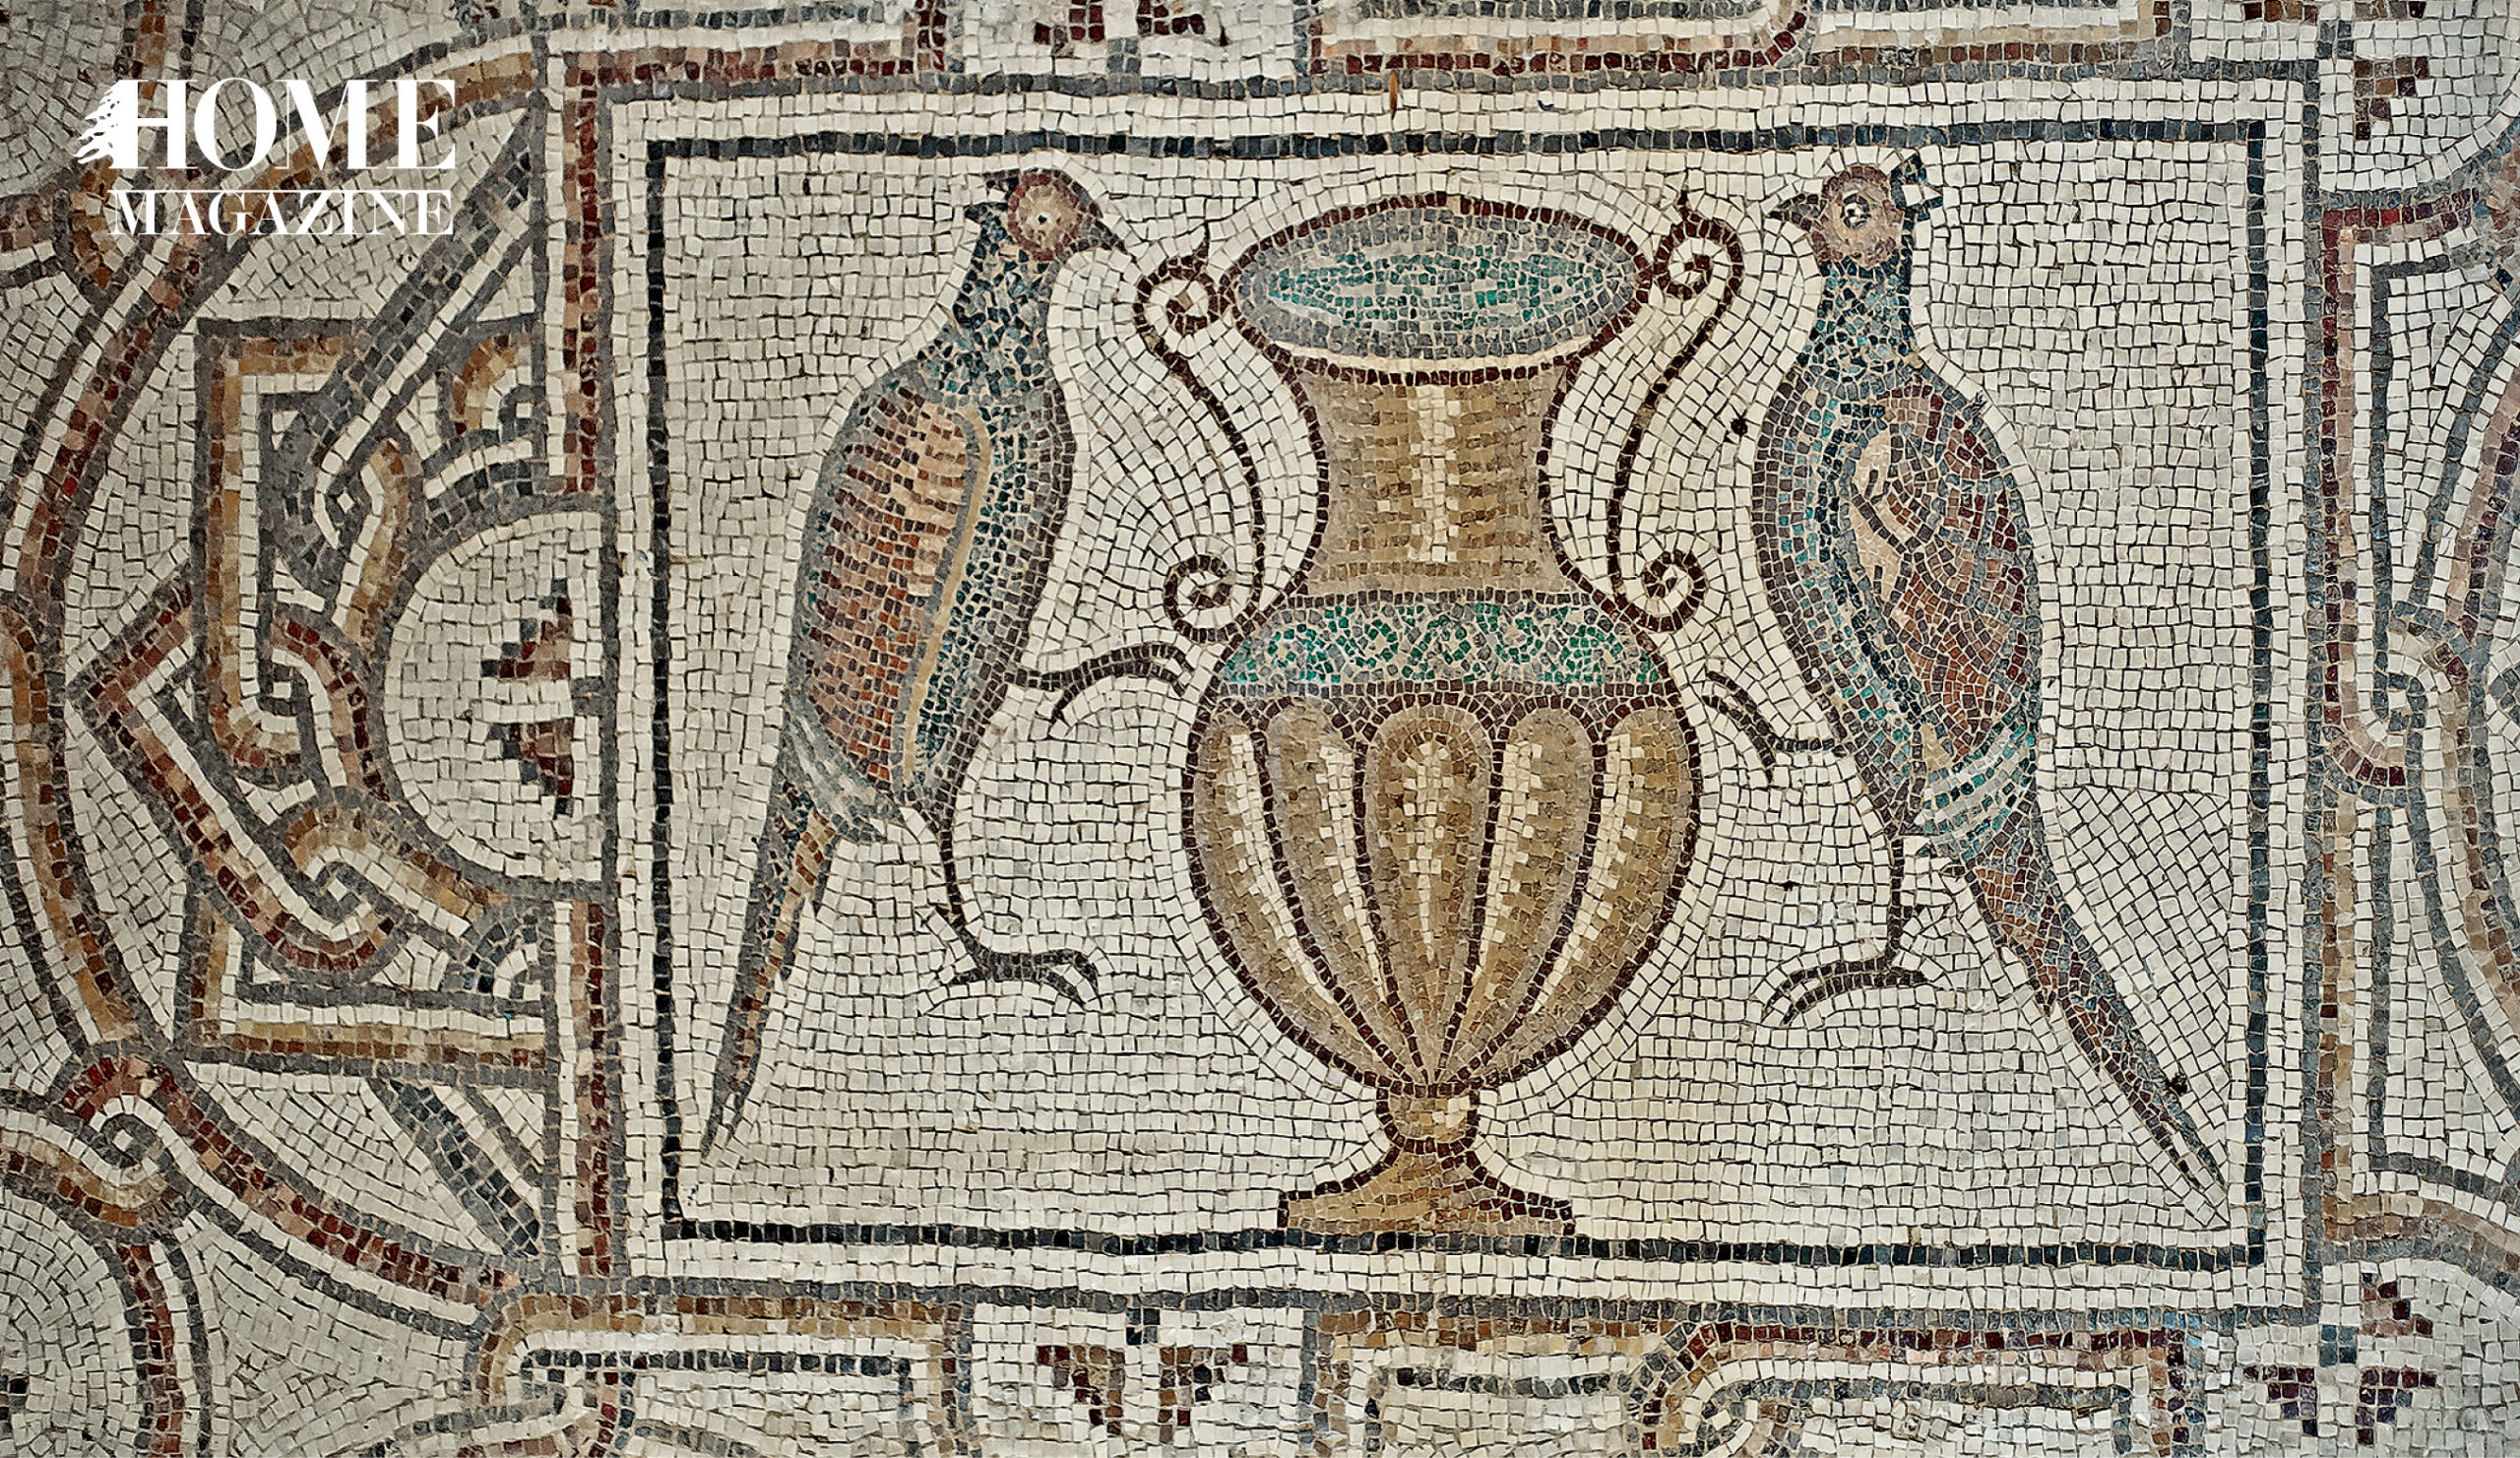 Illustration of two birds and a vase in mosaic